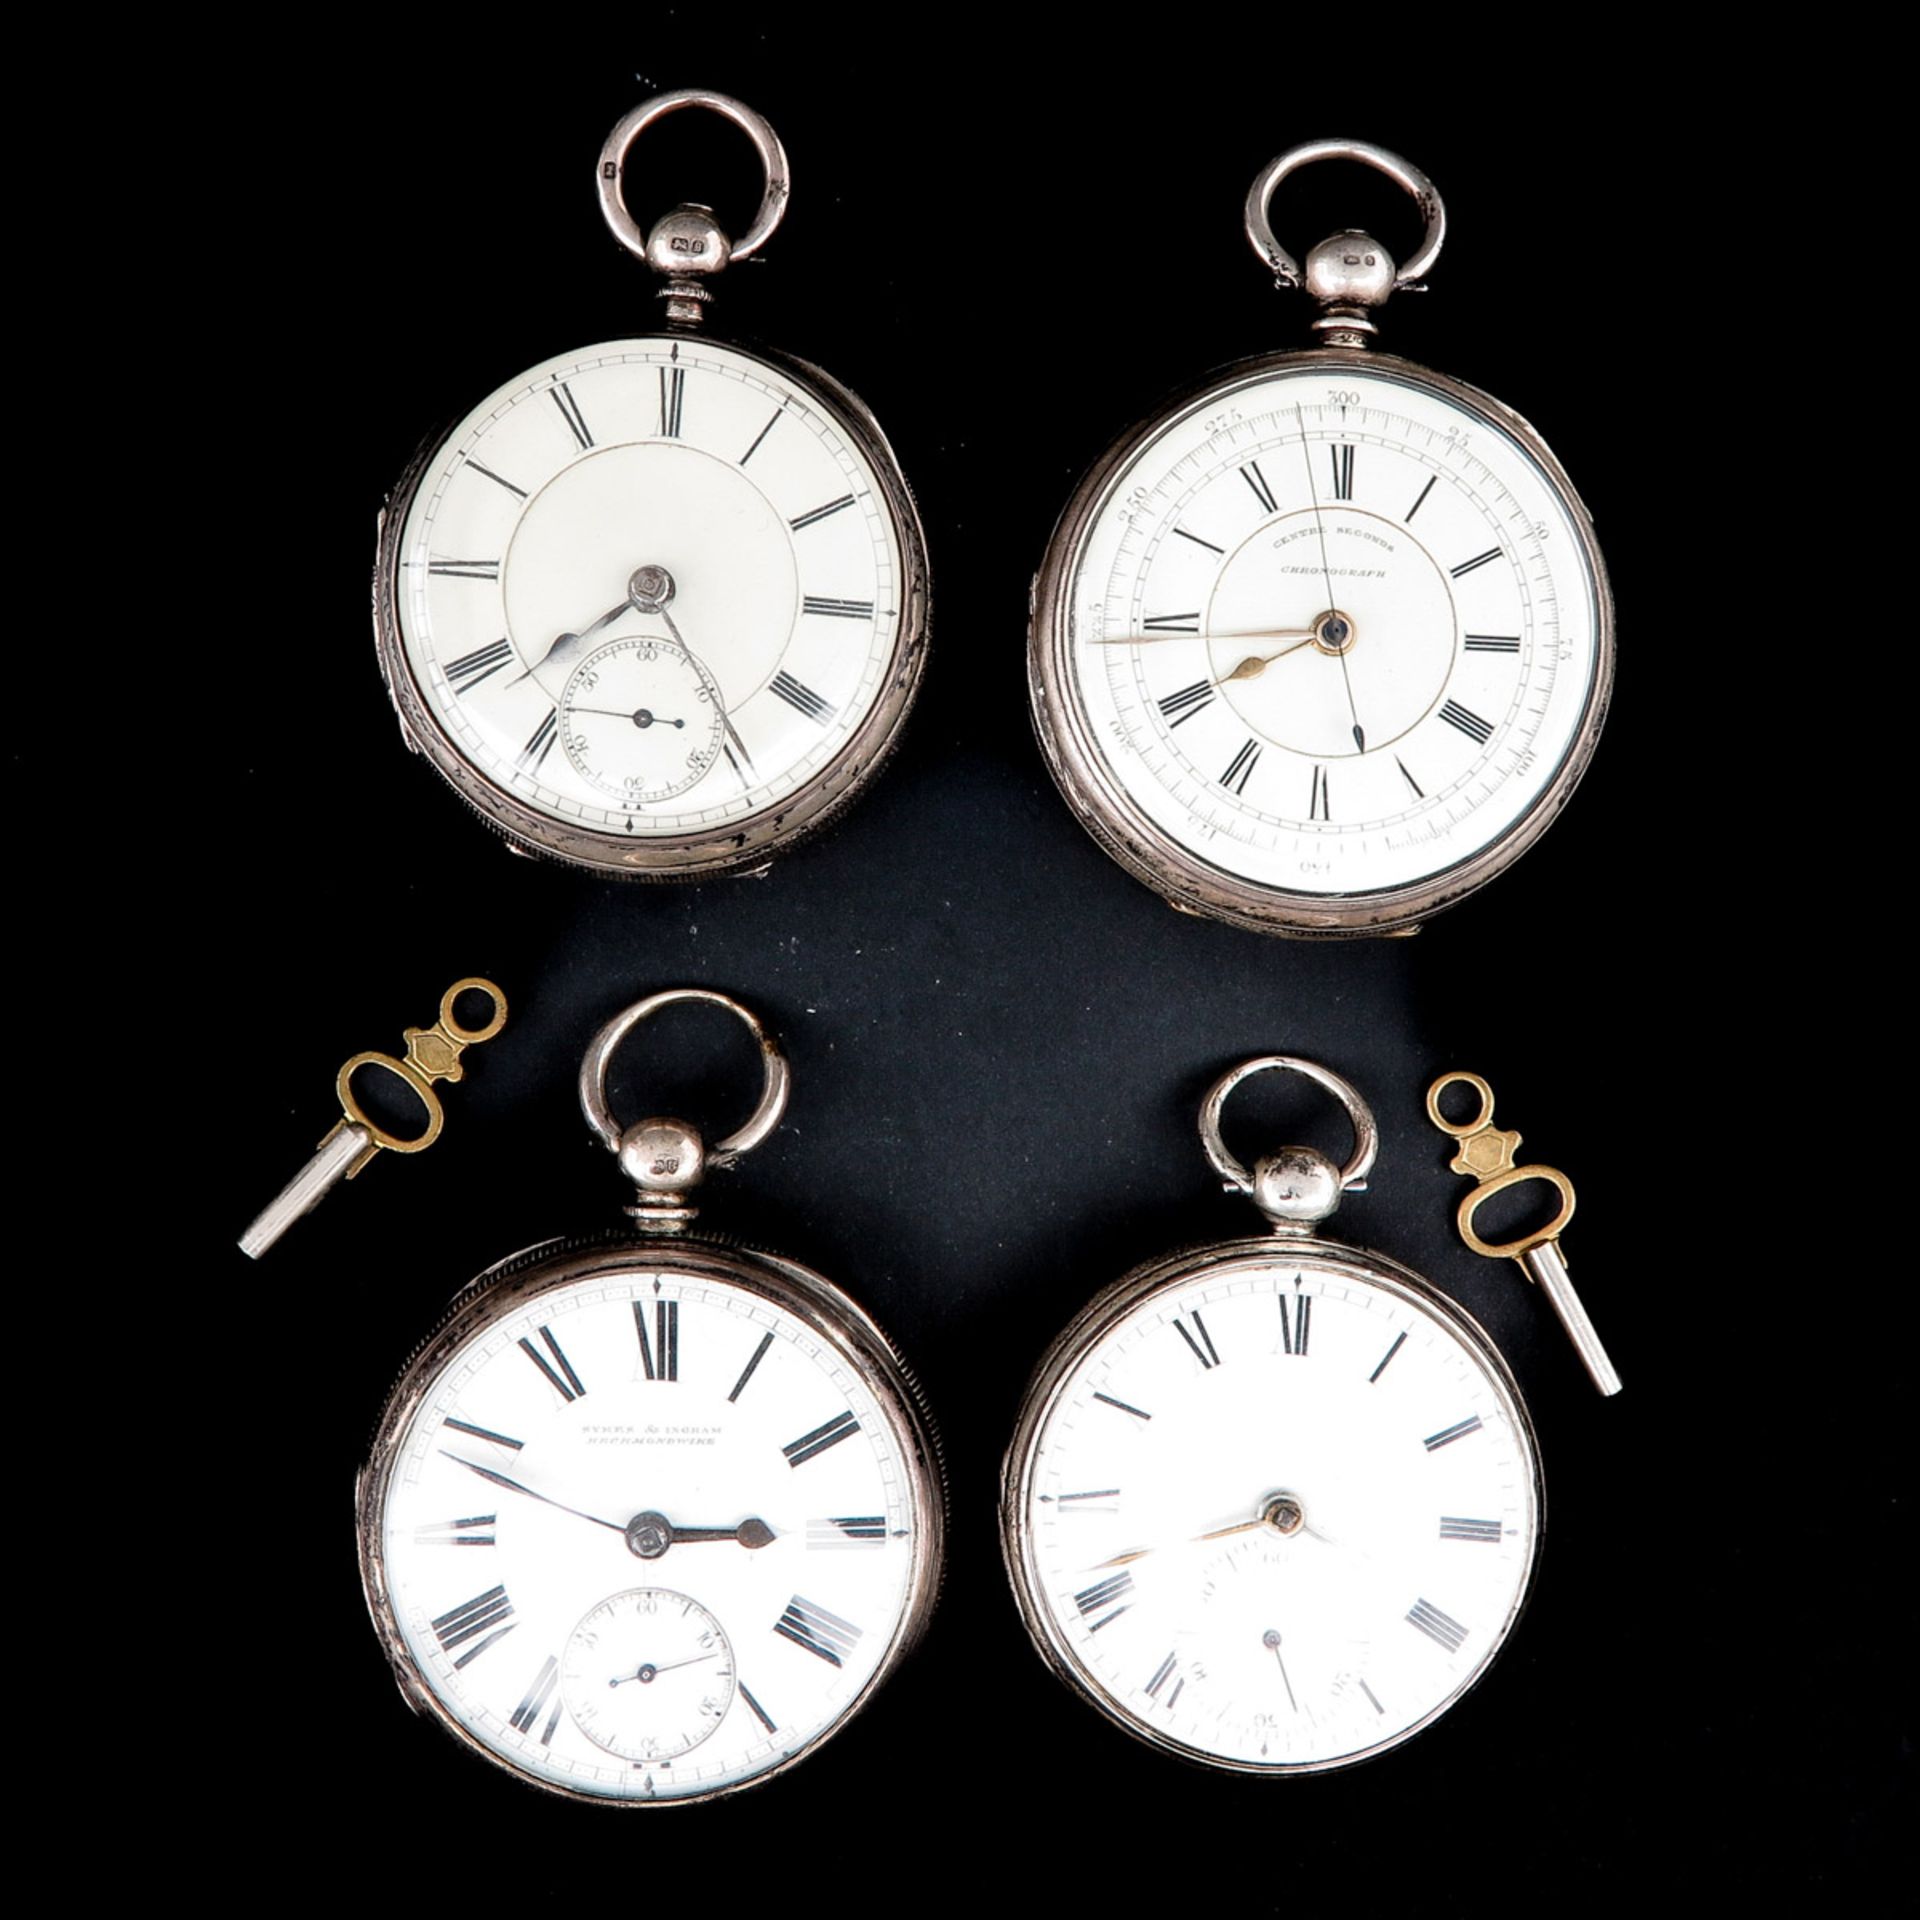 A Collection of 4 Pocket Watches